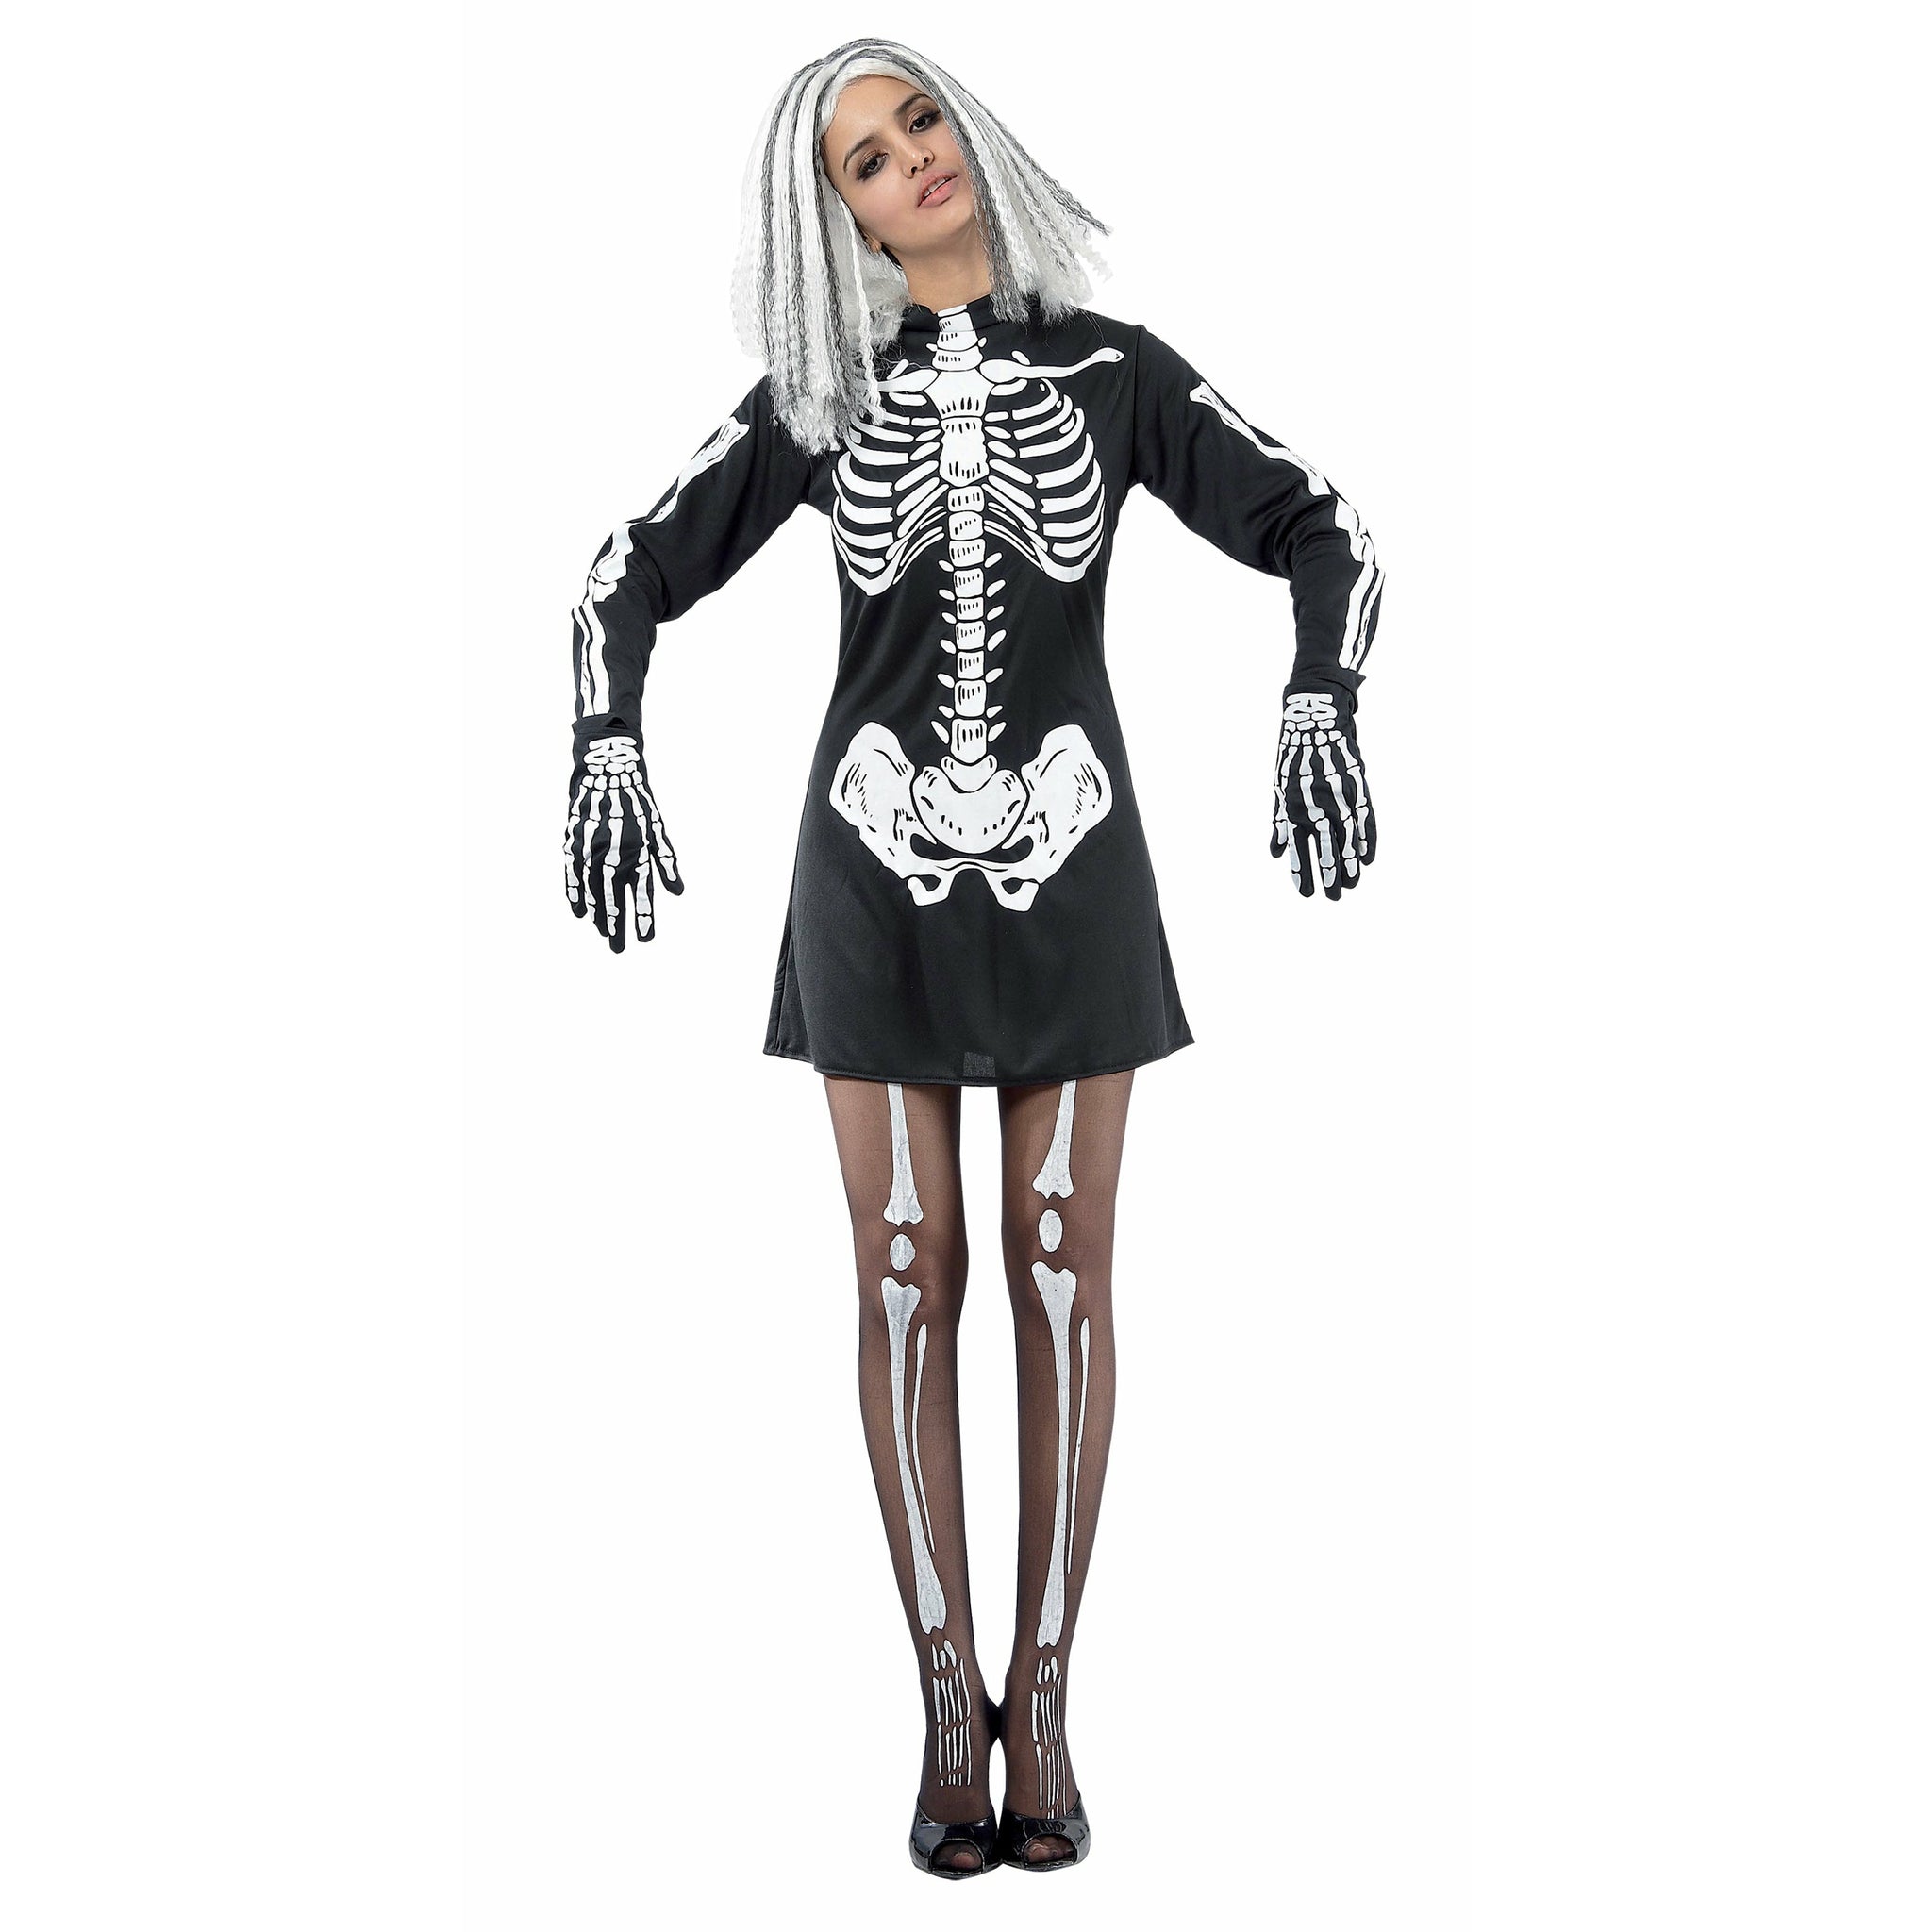 Ciao - Adult Costume - Lady Skeleton (62142) - Gadgets